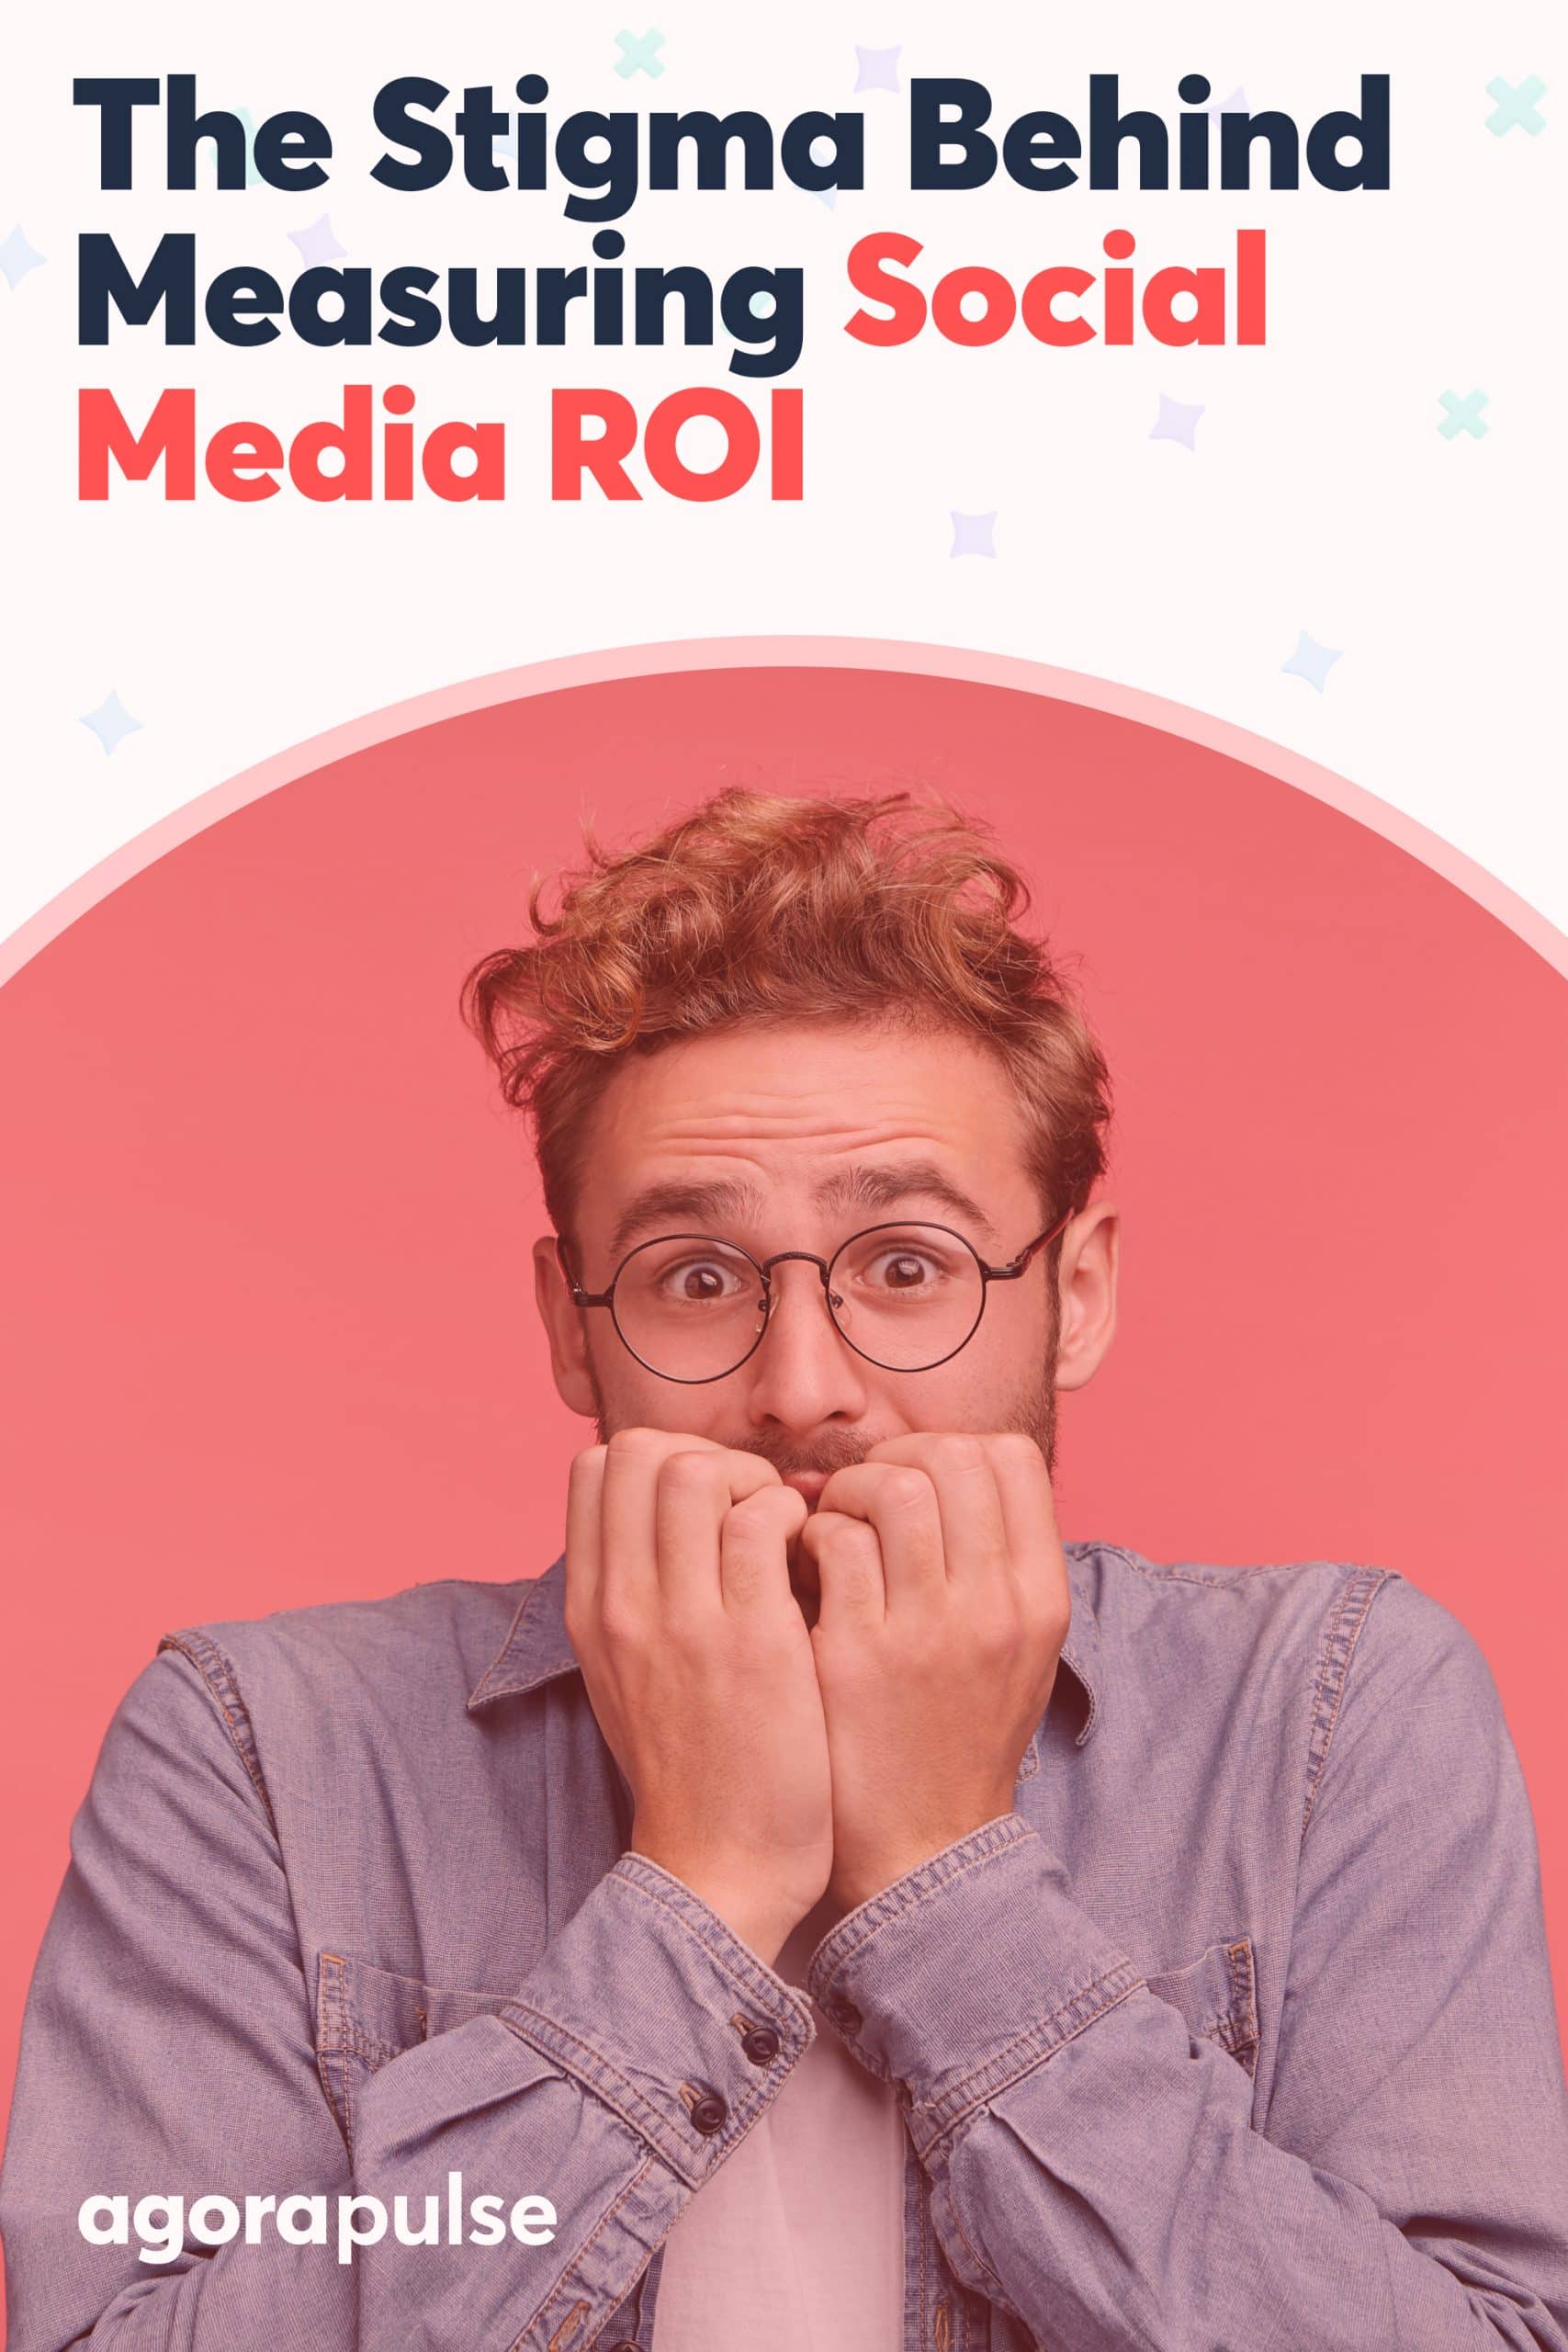 How to Overcome Barriers to Measuring Social Media ROI